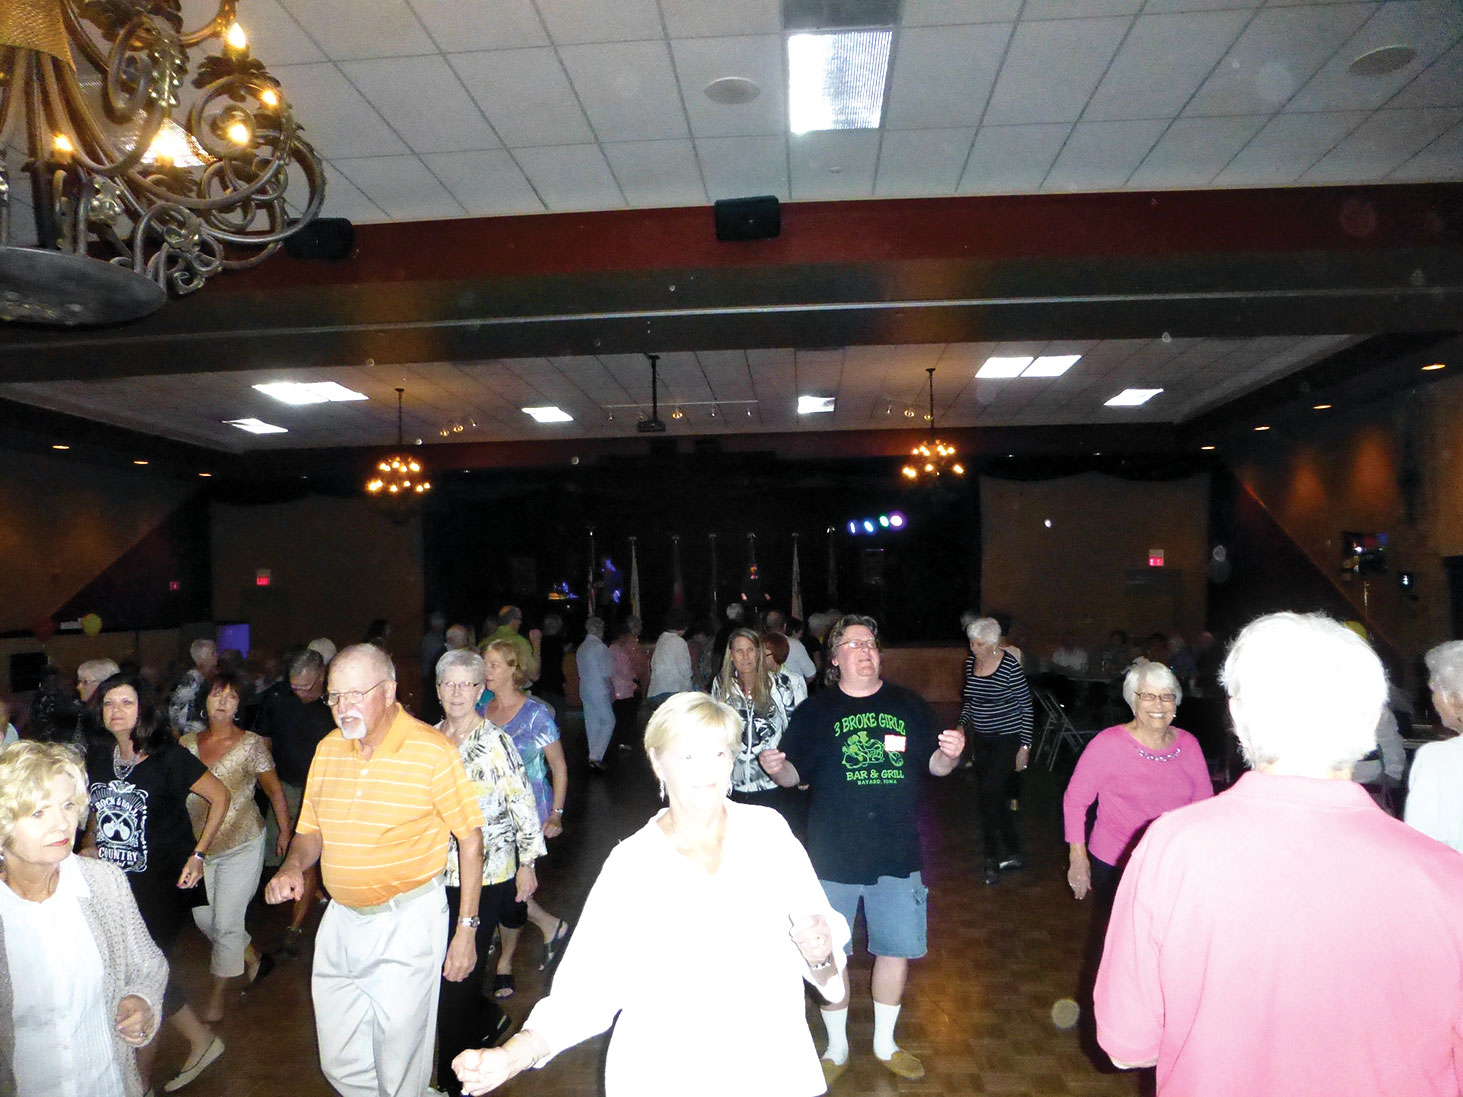 Line dancing to the music of Thaddeus Rose